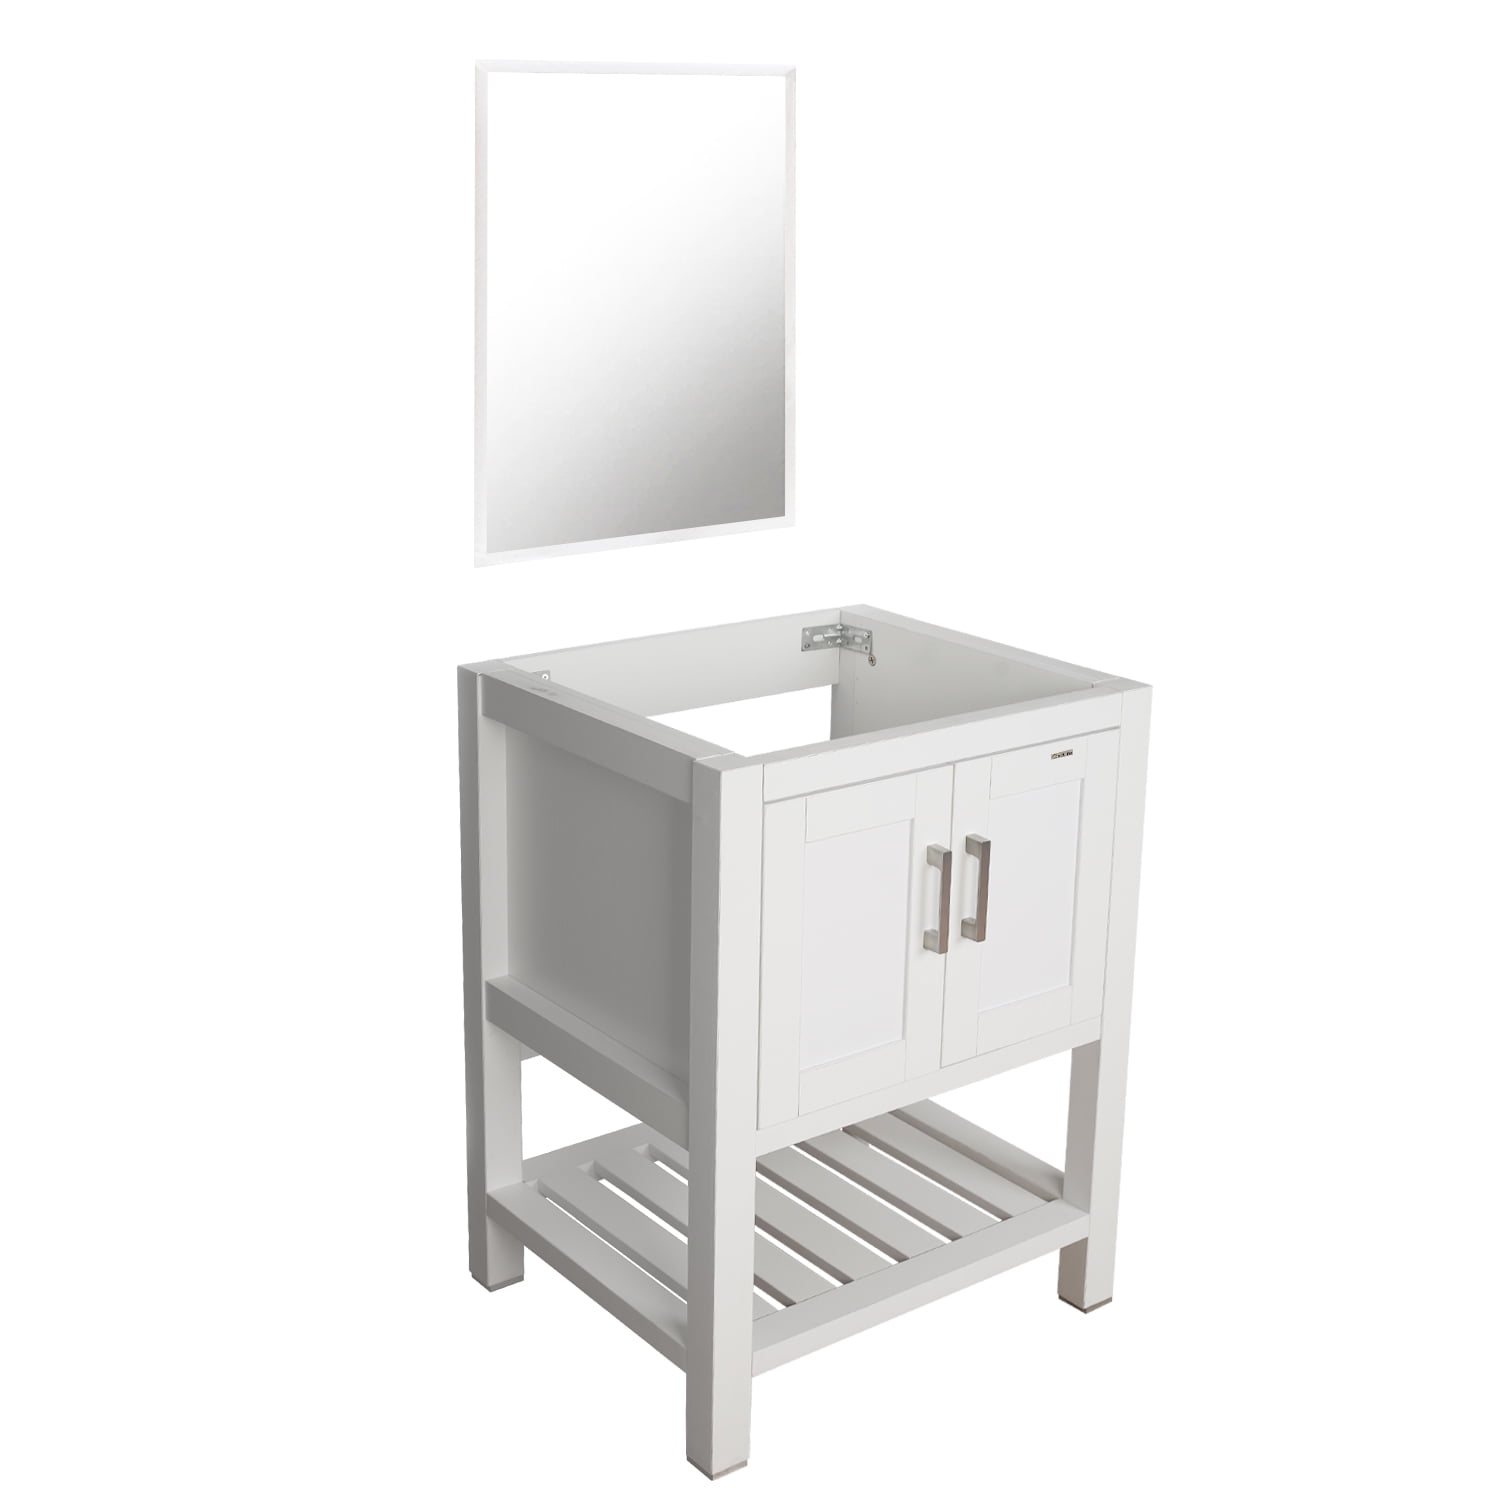 Eclife Bathroom Vanity Without Sink 24, Small White Bathroom Vanity With Drawers